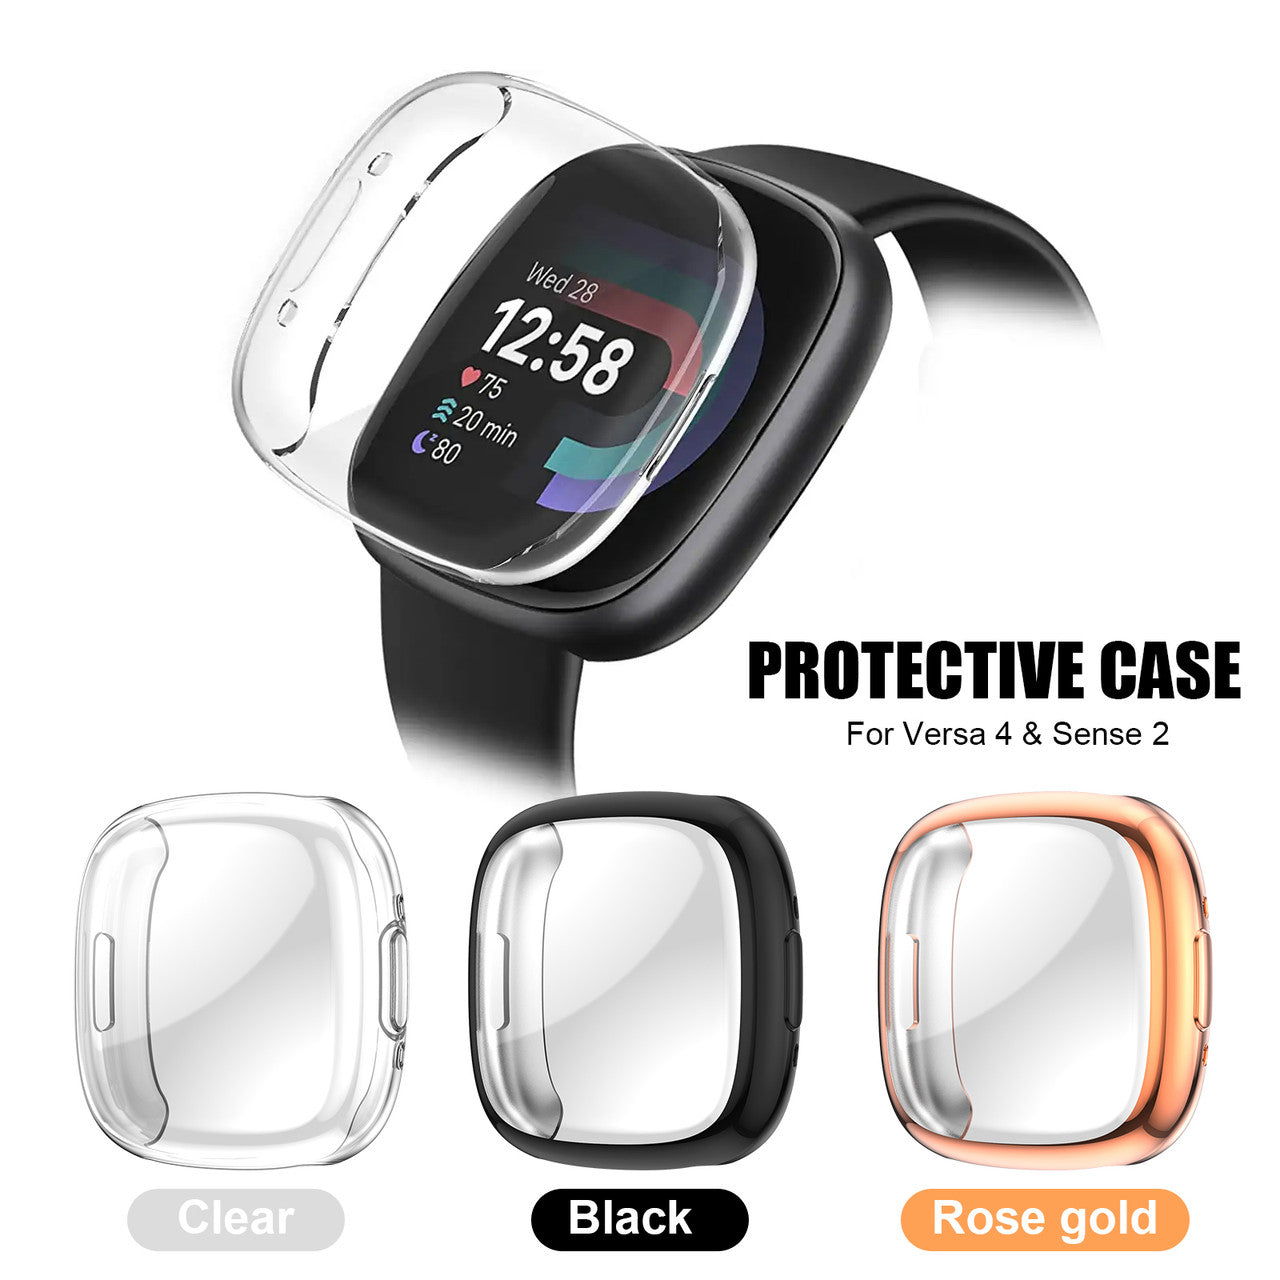 3 Packs TPU Screen Protector Case for Fitbit - Soft Tpu Plated Bumper Shell All-around Full Cover Protective Cases for Sense 2 / Versa 4 Smartwatch, Fitbit Accessory  (Gold, Black, Clear)